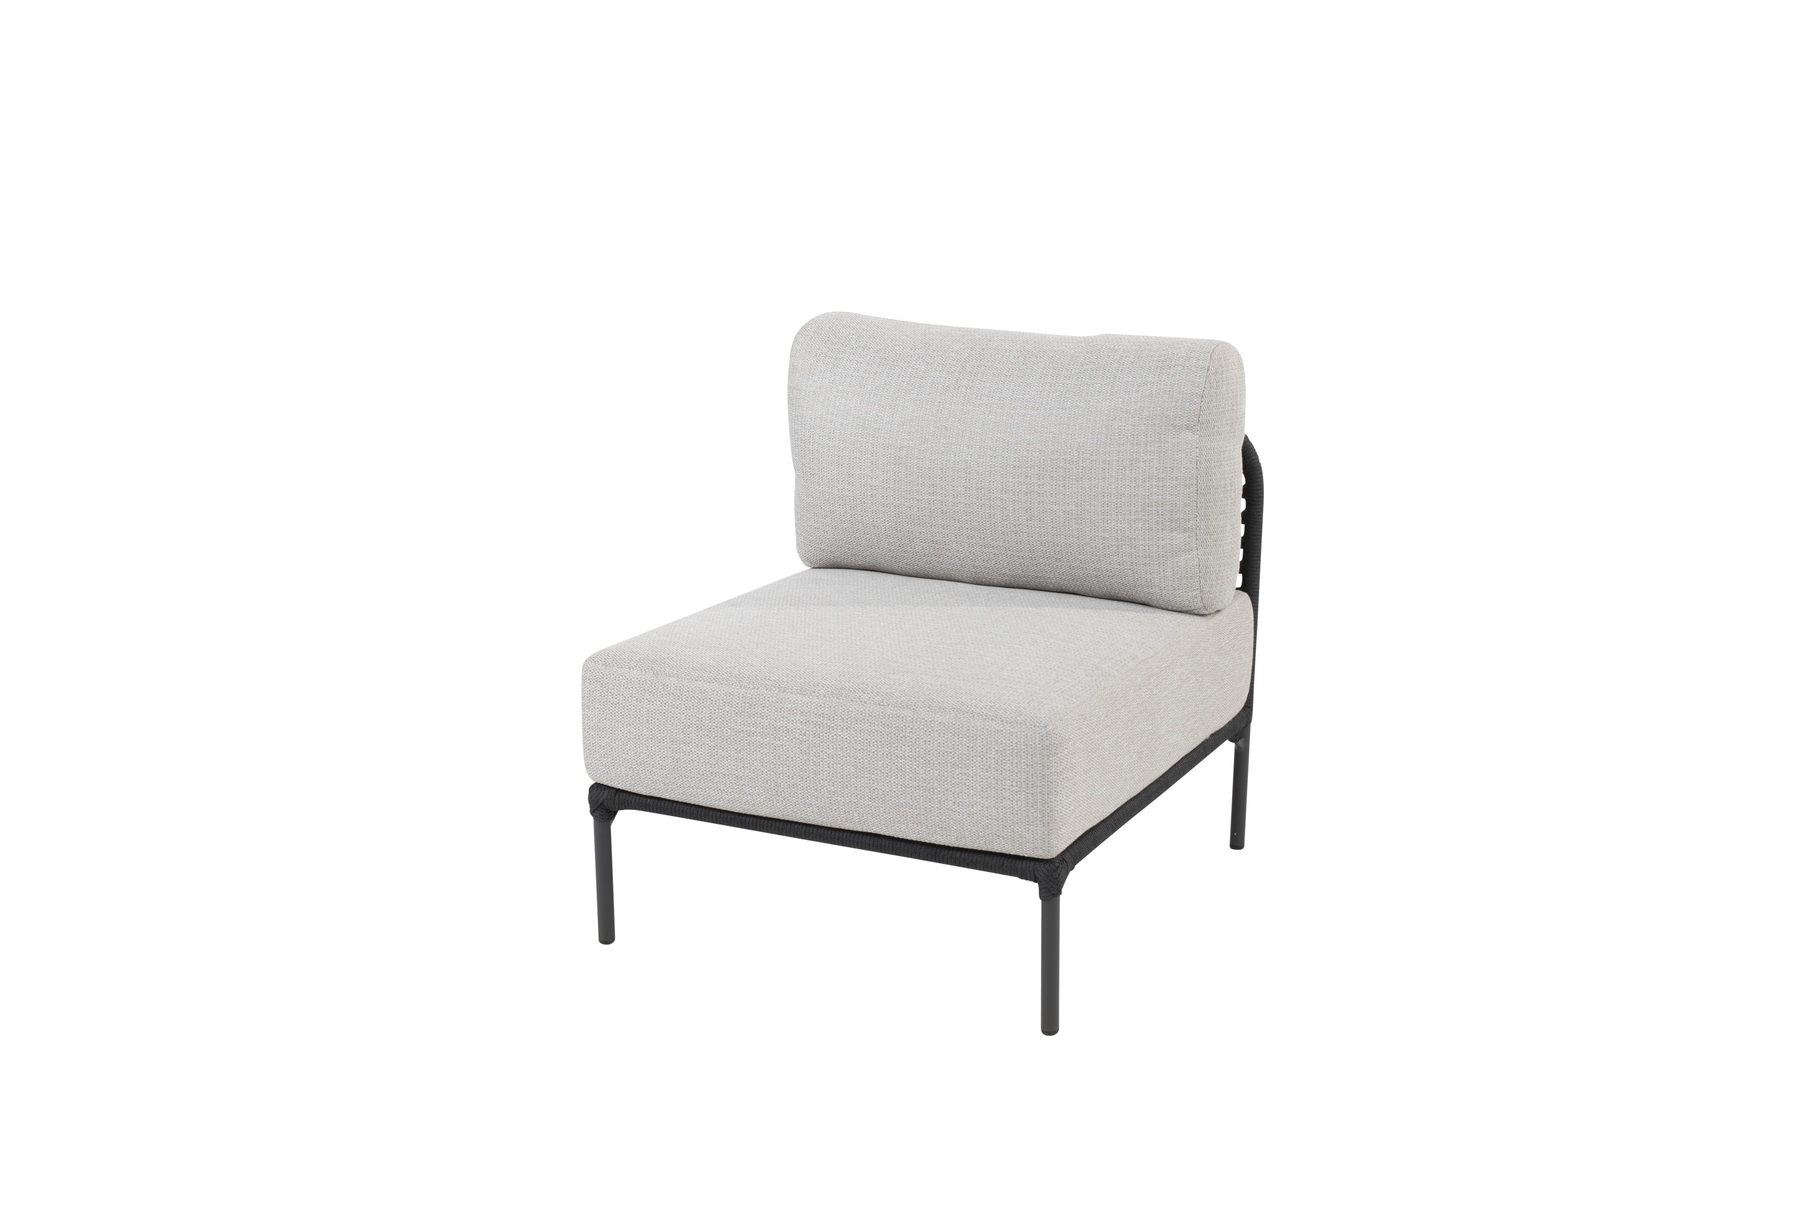 213926__Fabrice_center_anthracite_with_2_cushions_01.jpg